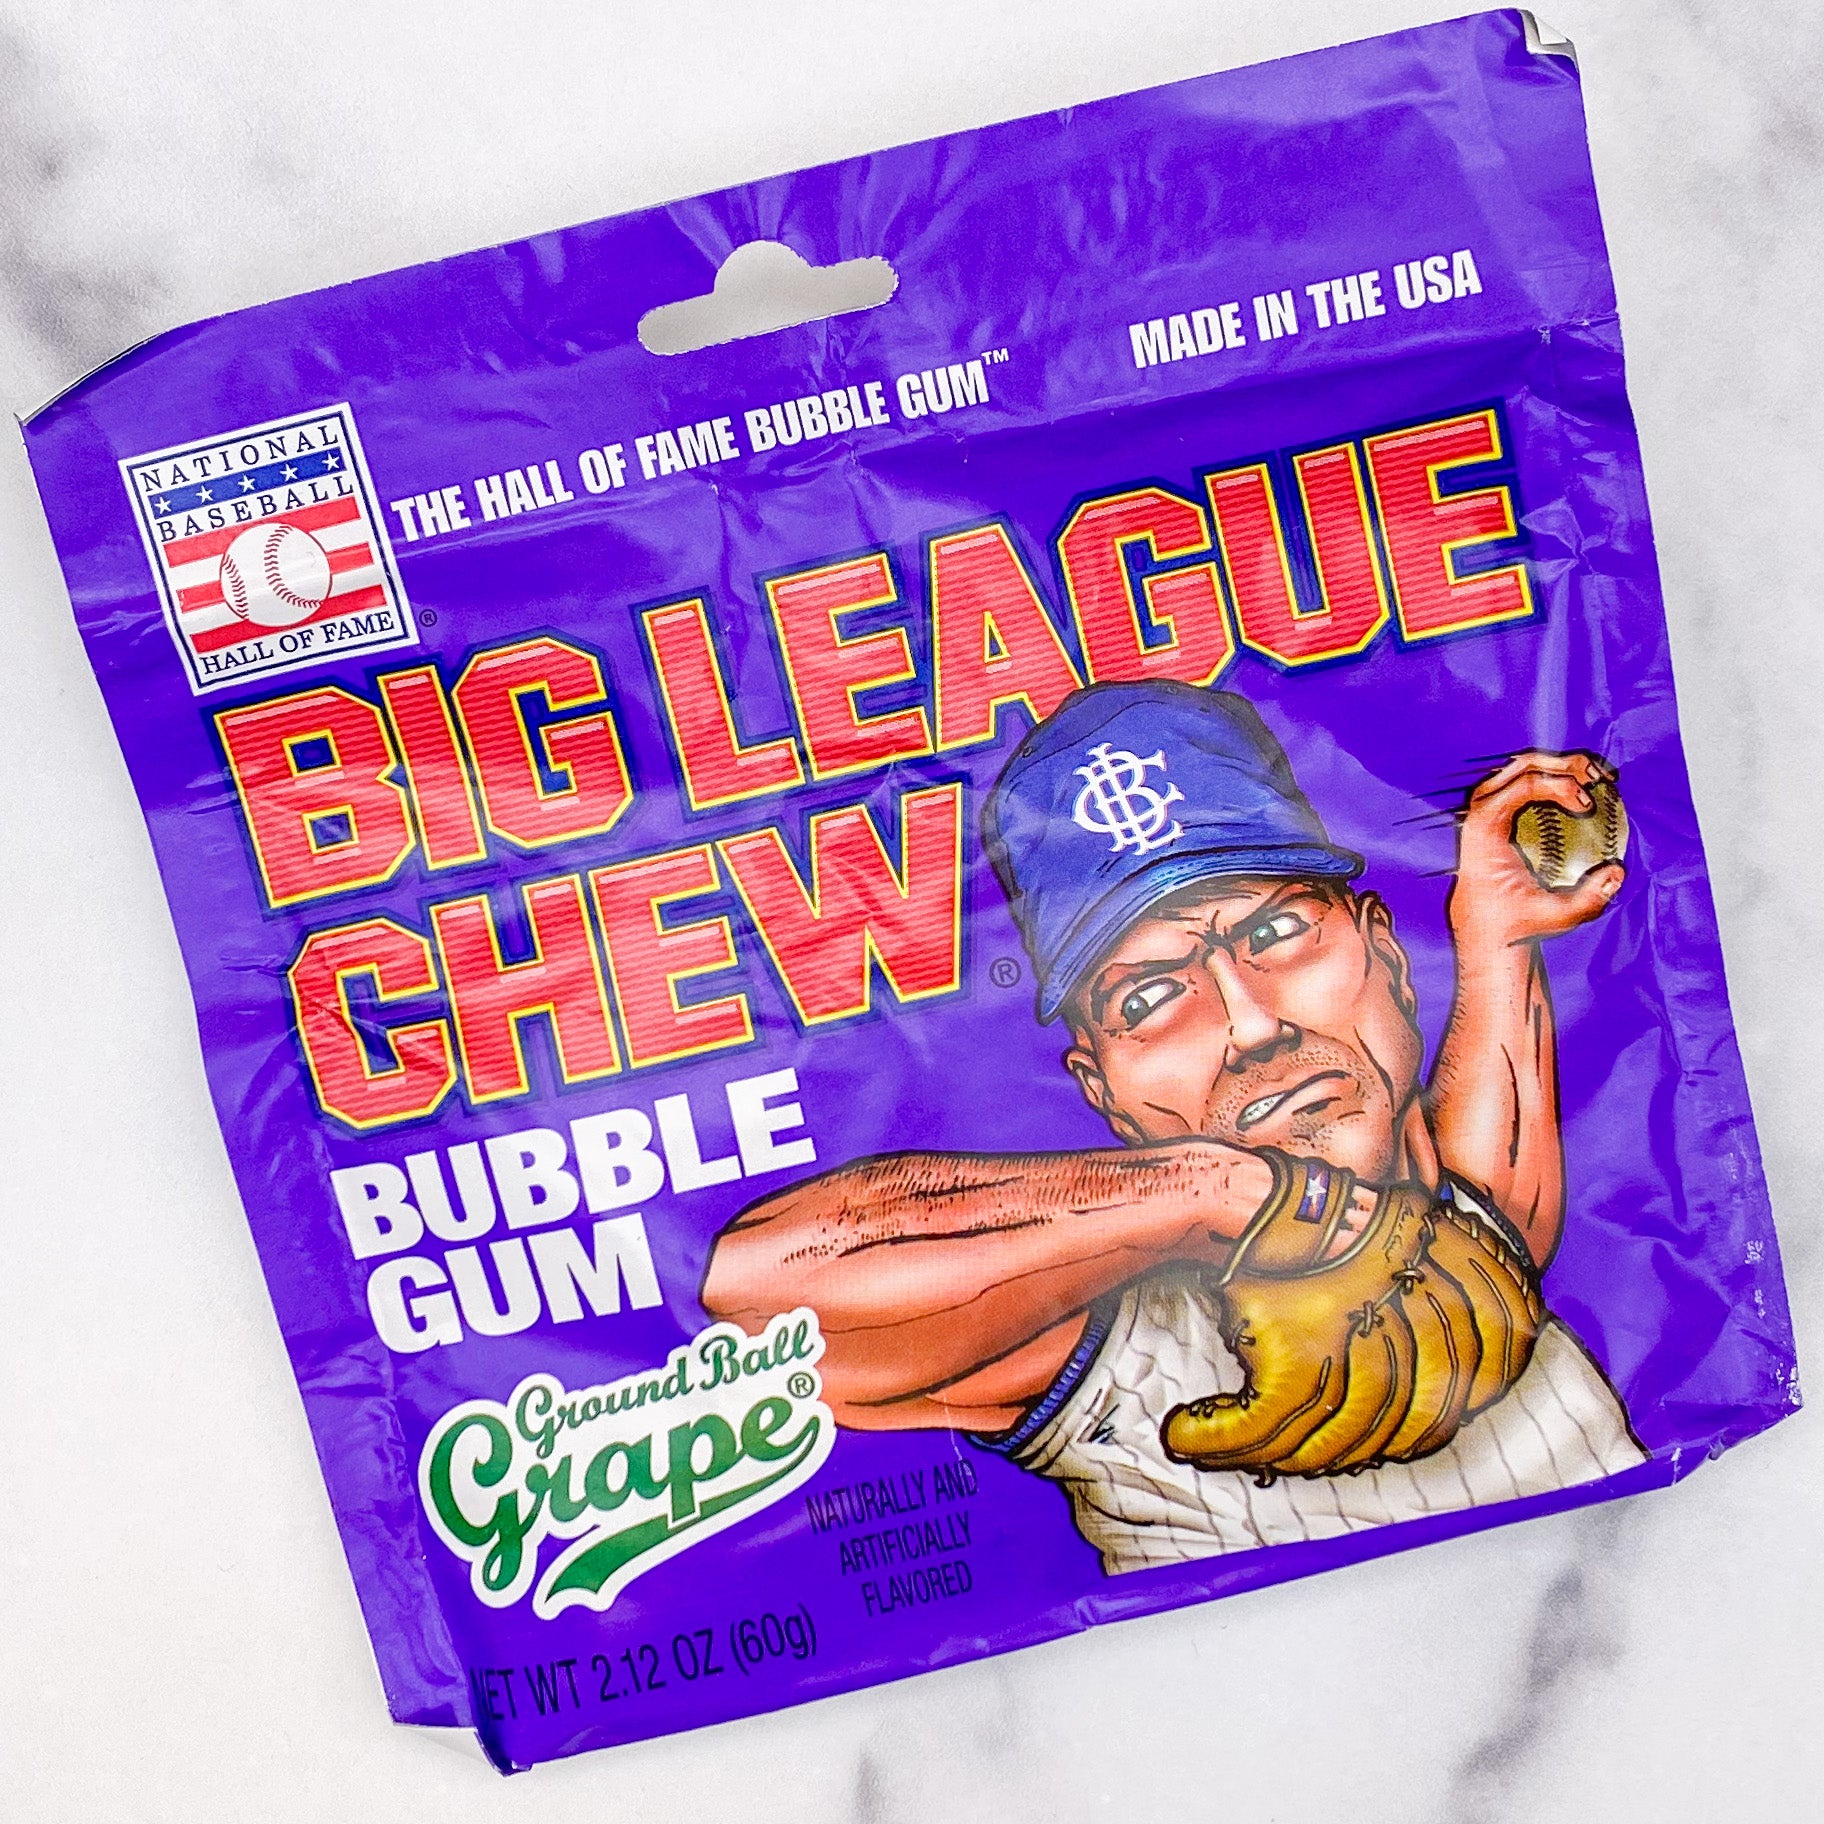 The Candy Baron > Candy Classics > Big League Chew - Assorted